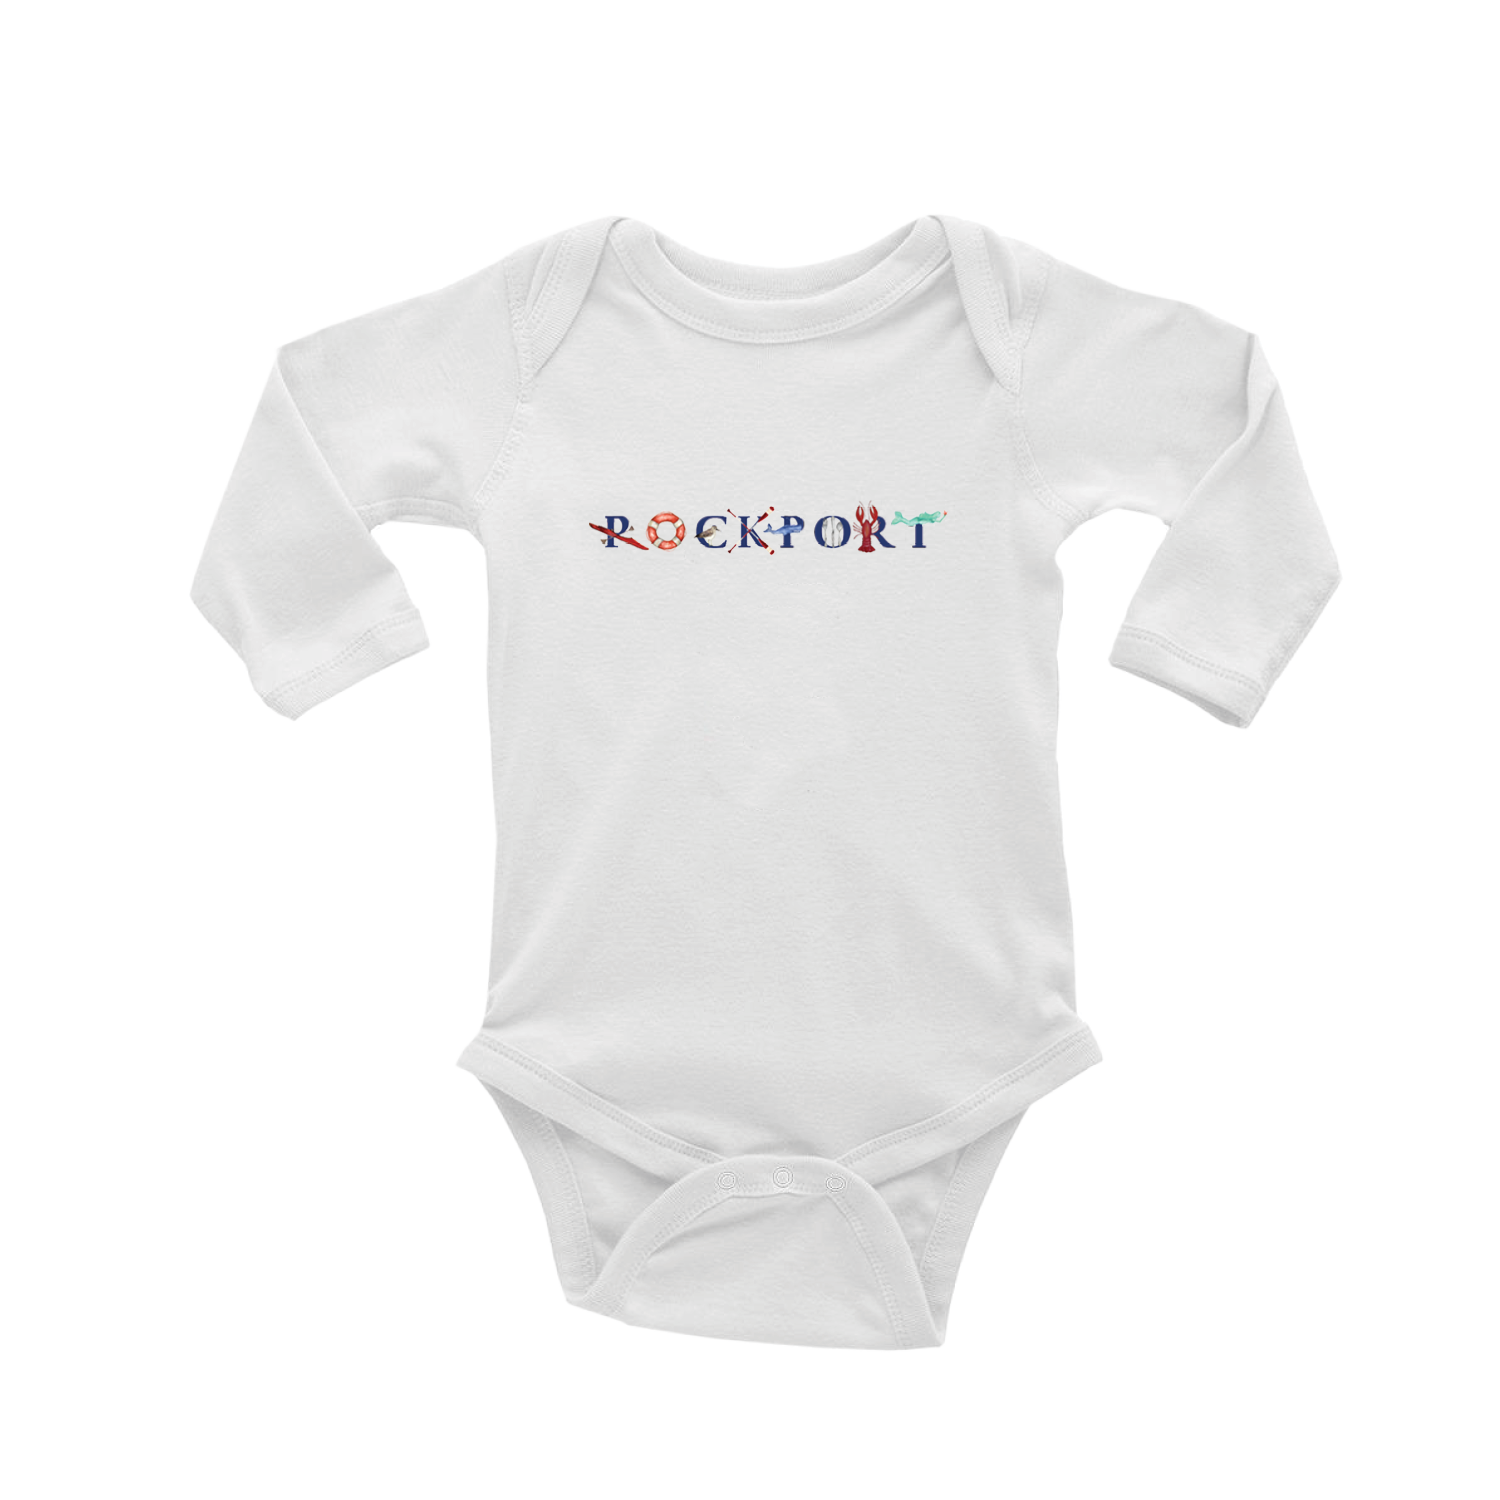 Rockport baby snap up long sleeve